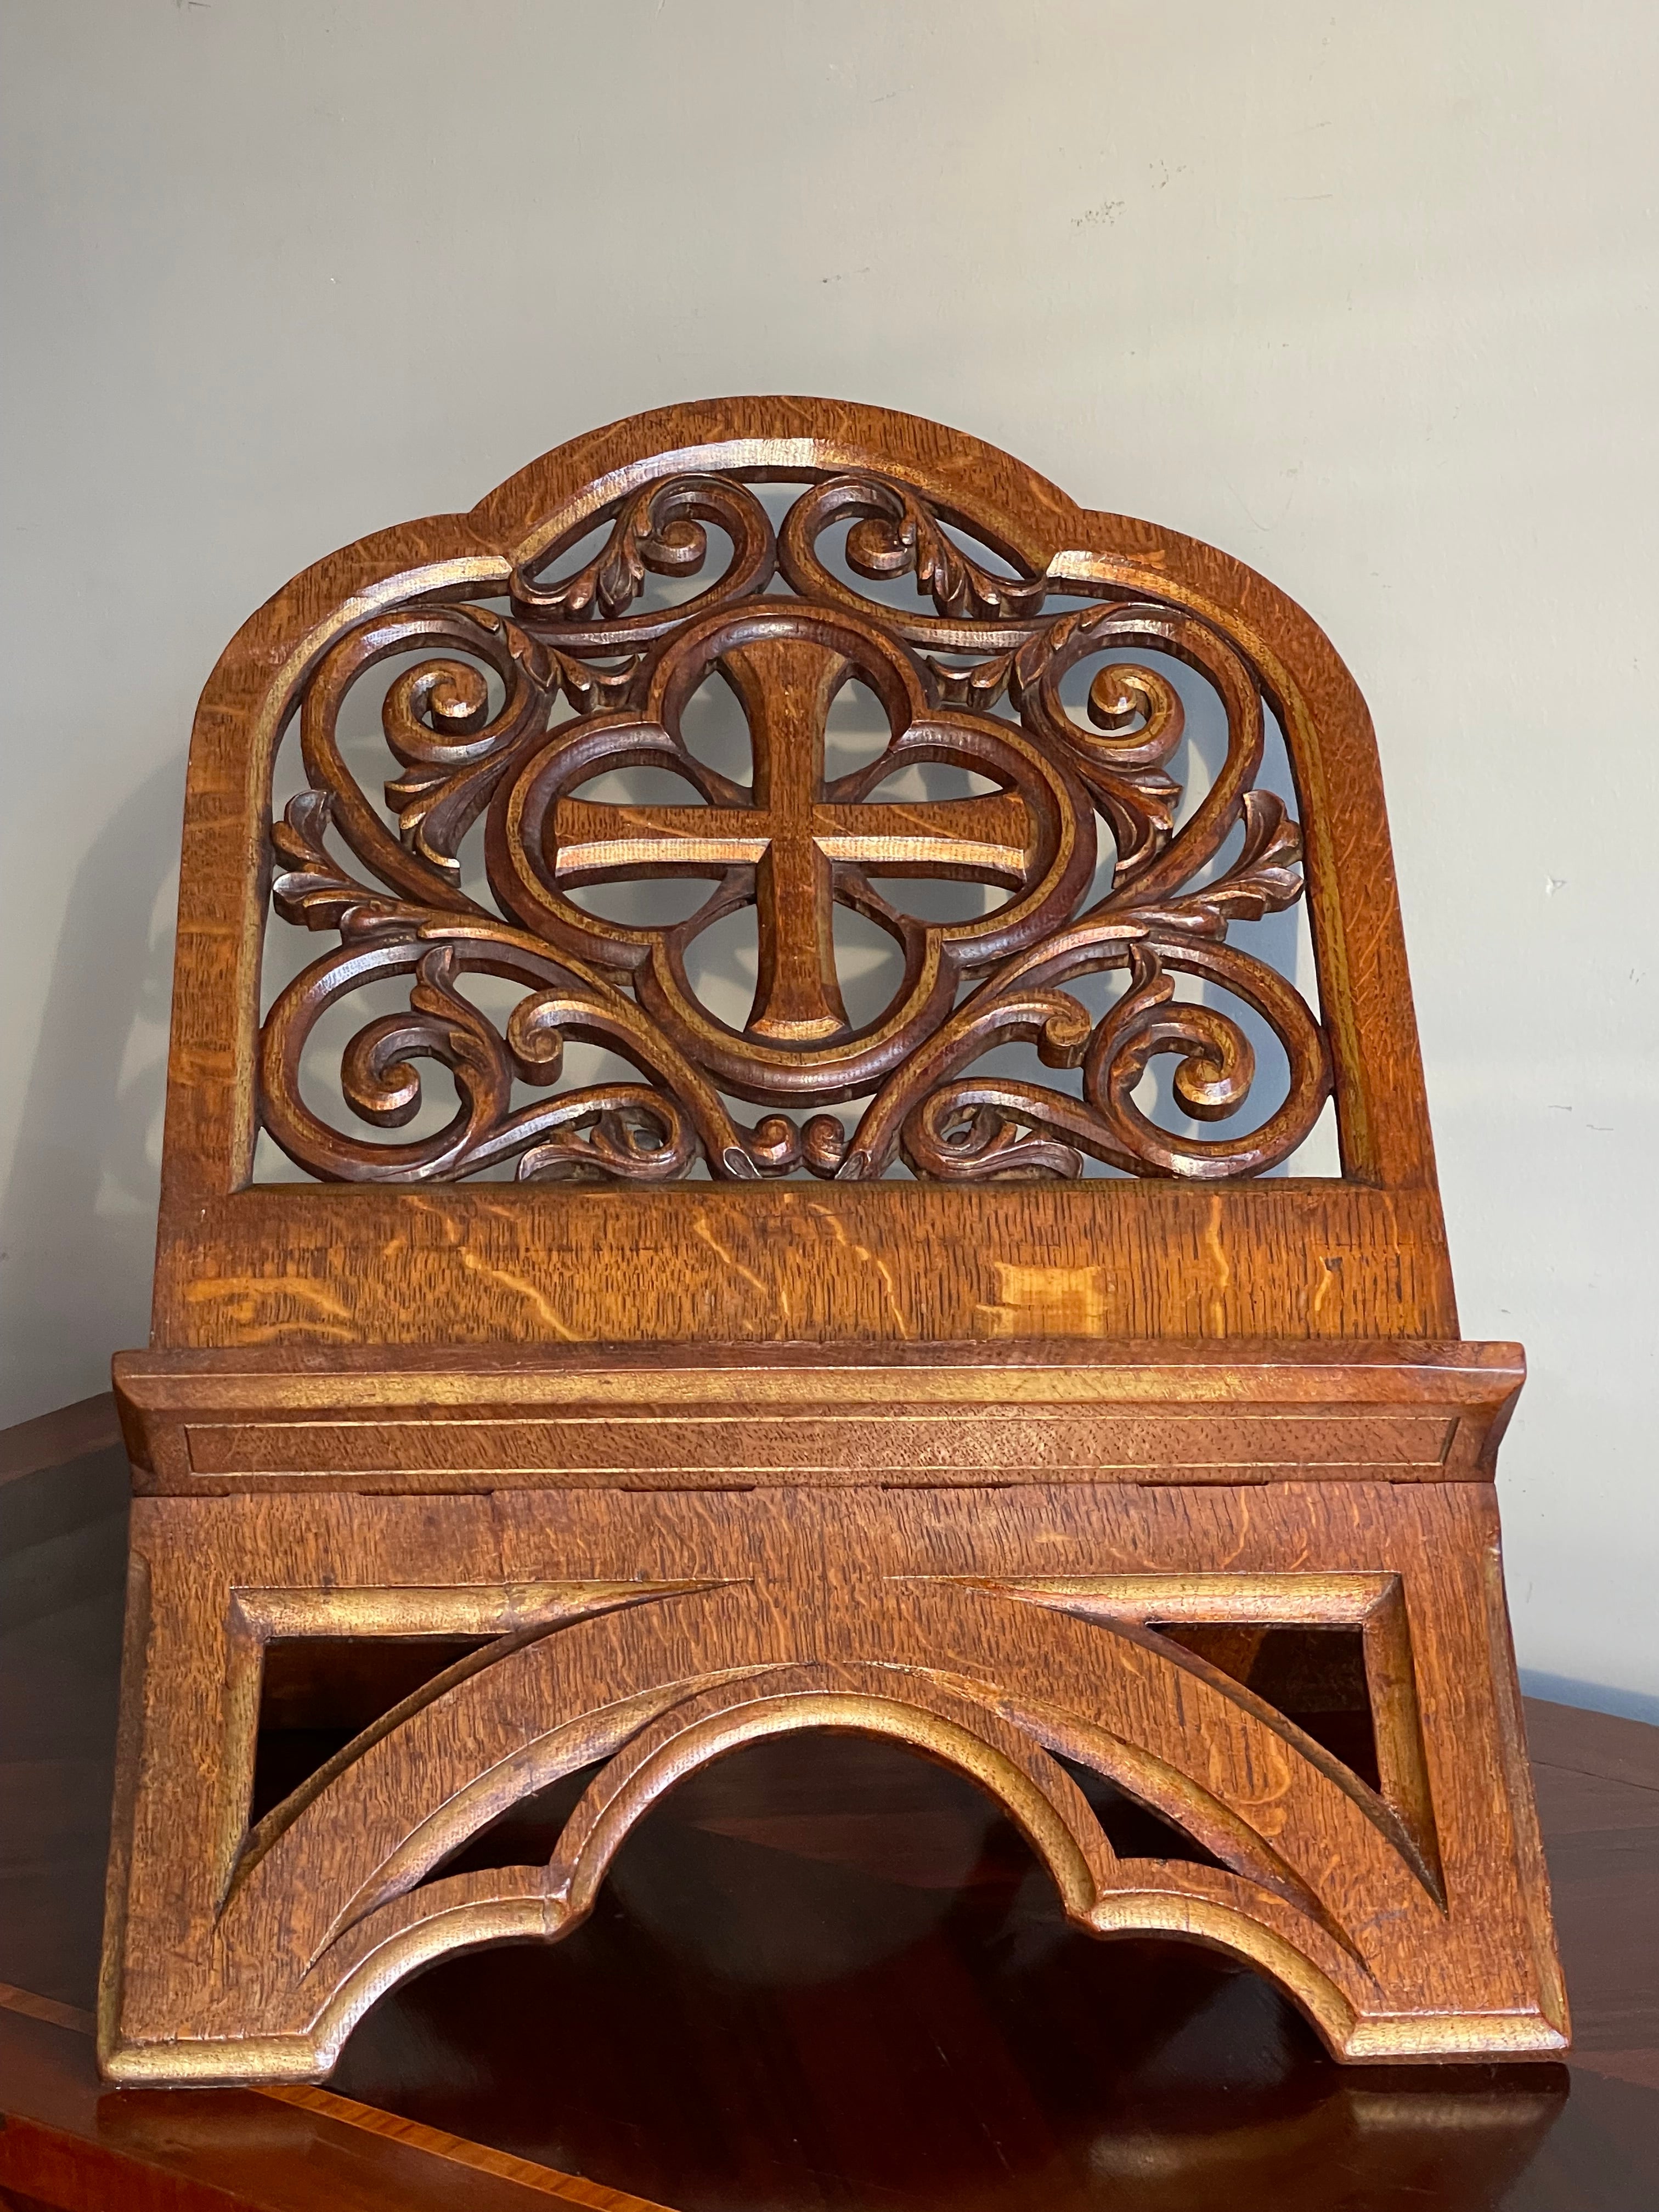 One of a kind and foldable, Gothic church book stand of superb quality and condition.

This beautifully hand carved, antique Gothic bible stand dates from circa 1890-1910 and it is entirely made of solid oak. This unique church relic is in superb